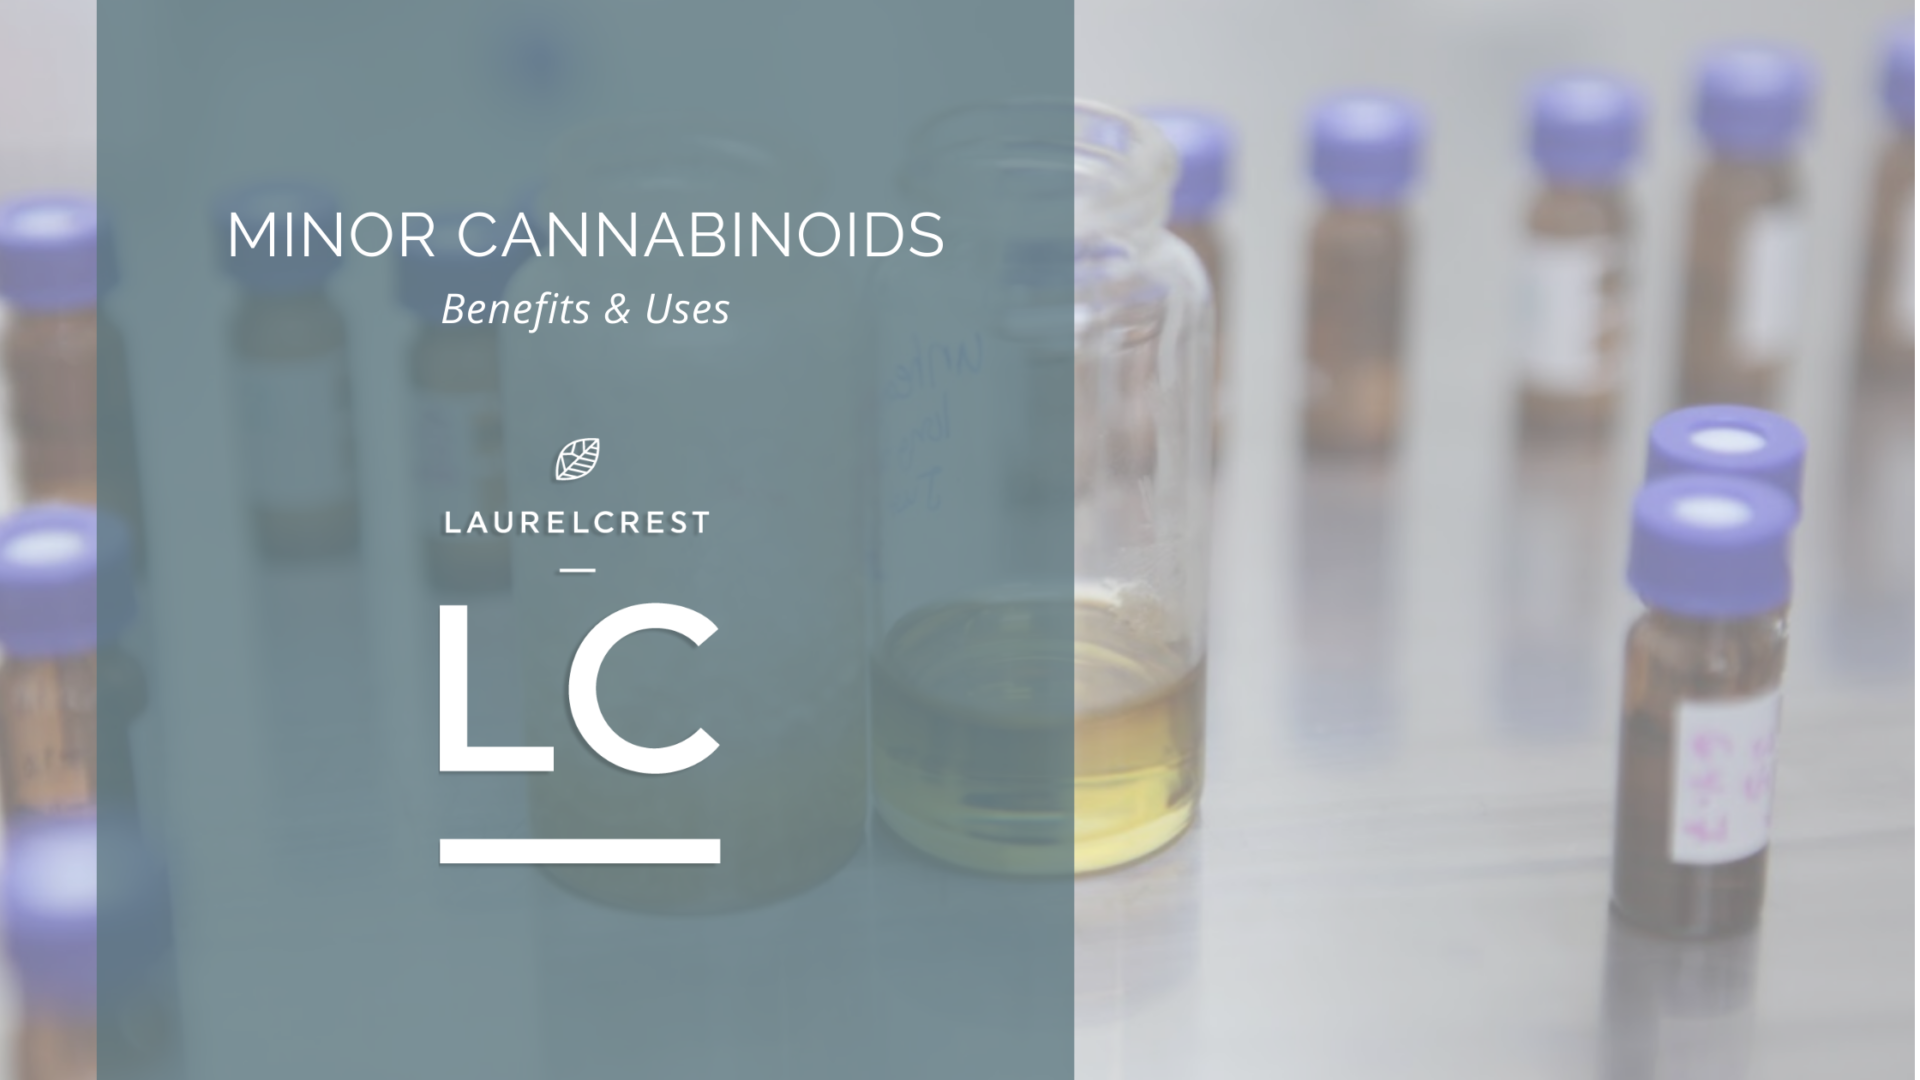 What Can I Expect After Taking Cbc Oil For The First Time - Cbd|Oil|Cbc|Benefits|Effects|Pain|Thc|Products|Health|Study|Cannabinoids|Cannabis|Anxiety|Studies|Hemp|Research|Symptoms|People|Treatment|System|Plant|Body|Inflammation|Product|Evidence|Receptors|Cancer|Side|Effect|Properties|Brain|Dose|Disease|Marijuana|Cannabidiol|Disorders|Cannabinoid|Way|Relief|Cells|Cbd Oil|Cbc Oil|Cbd Products|Side Effects|Endocannabinoid System|Chronic Pain|Cannabis Plant|Pain Relief|Cbd Oil Benefits|Cannabis Oil|Health Benefits|Multiple Sclerosis|Hemp Plant|Anti-Inflammatory Properties|Blood Pressure|Entourage Effect|Neuropathic Pain|Cbd Product|Hemp Oil|Full-Spectrum Cbd Oil|Nervous System|Hemp Seed Oil|High Blood Pressure|Immune System|Cbd Gummies|Cannabis Oil Benefits|Drug Administration|Anxiety Disorders|Dravet Syndrome|Lennox-Gastaut Syndrome